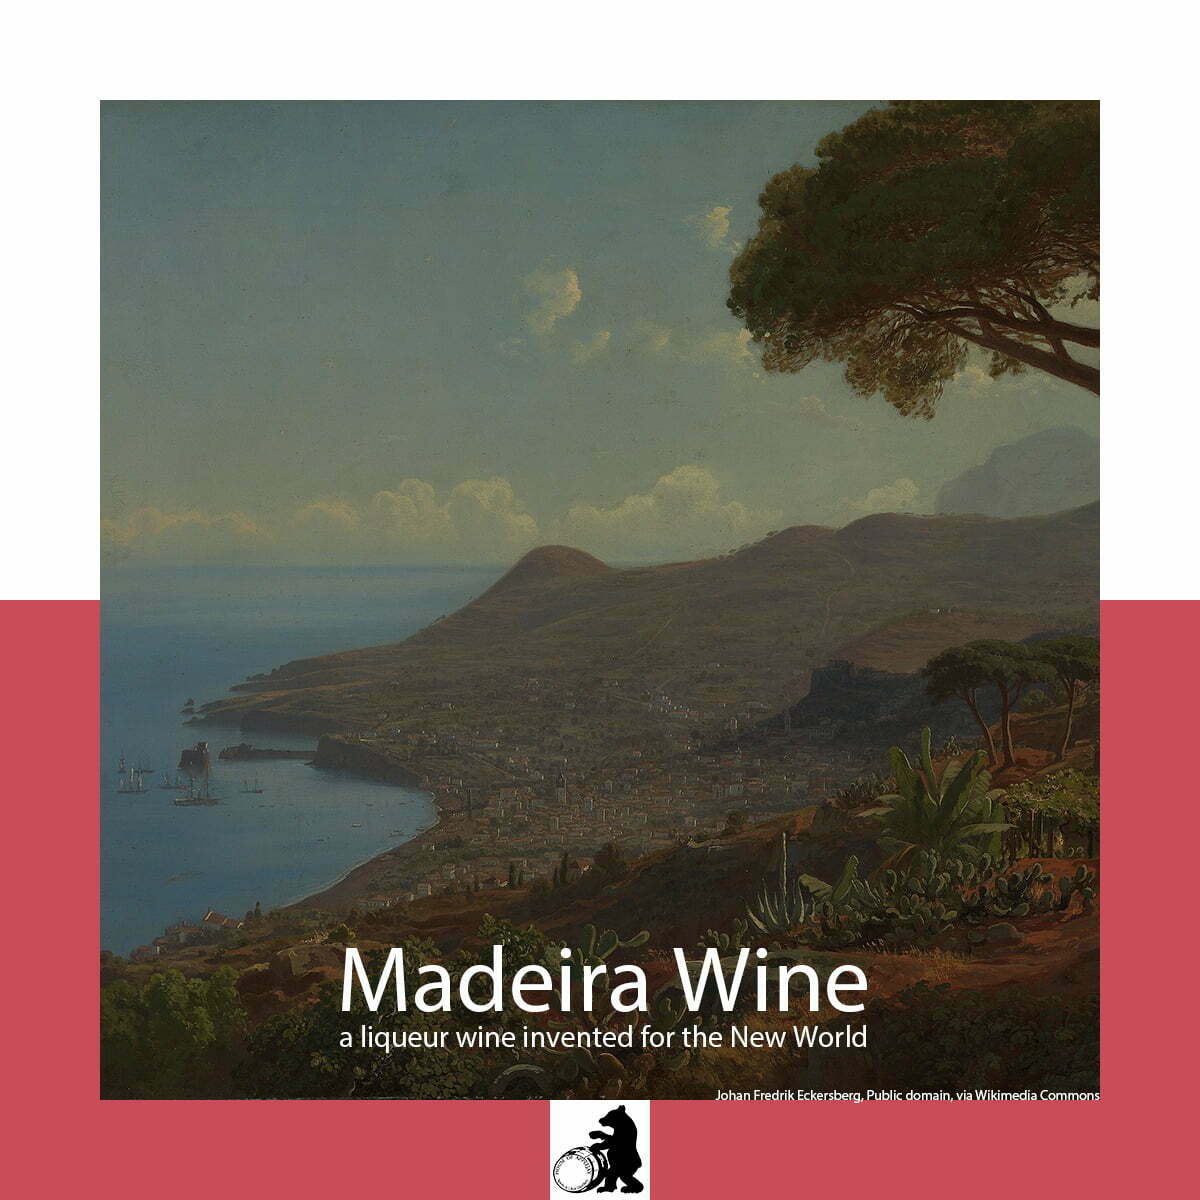 The Story of Madeira Wine